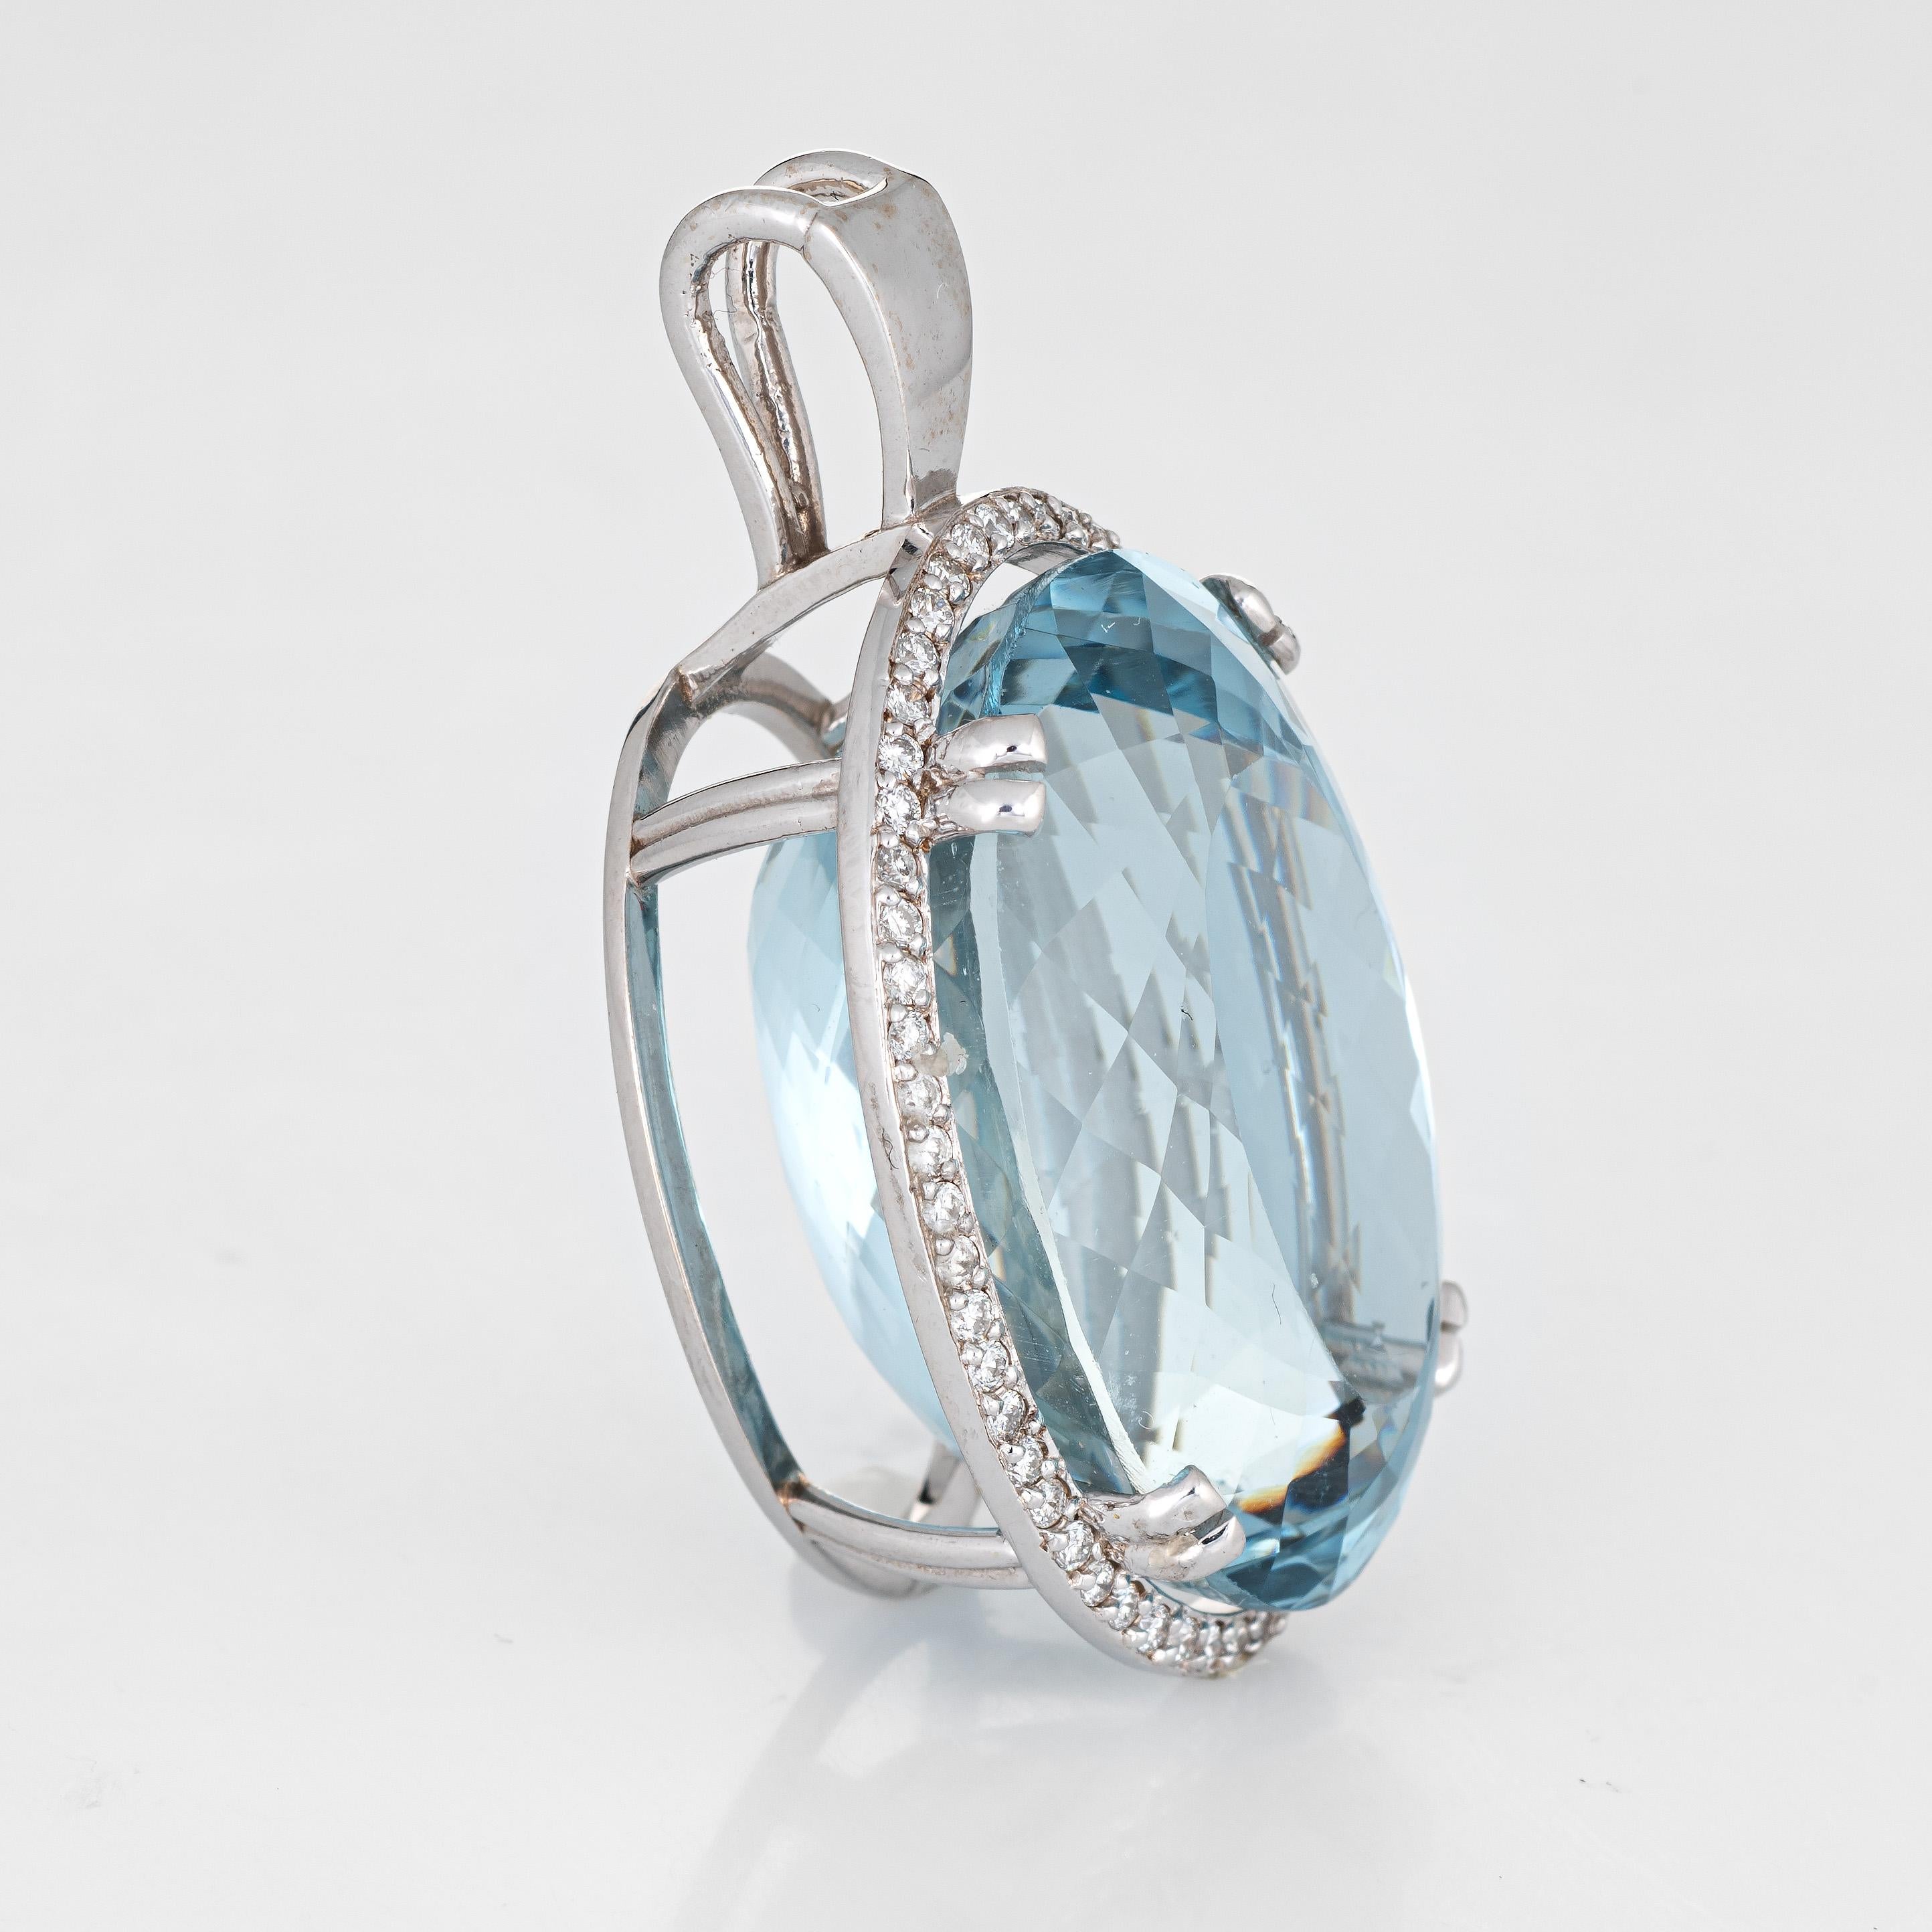 Finely detailed large blue topaz & diamond pendant crafted in 14k white gold.  

Faceted oval cut blue topaz measures 31mm x 22.5mm (estimated at 95 carats), accented with an estimated 1.12 carats of diamonds (estimated at H-I color and VS2-SI1